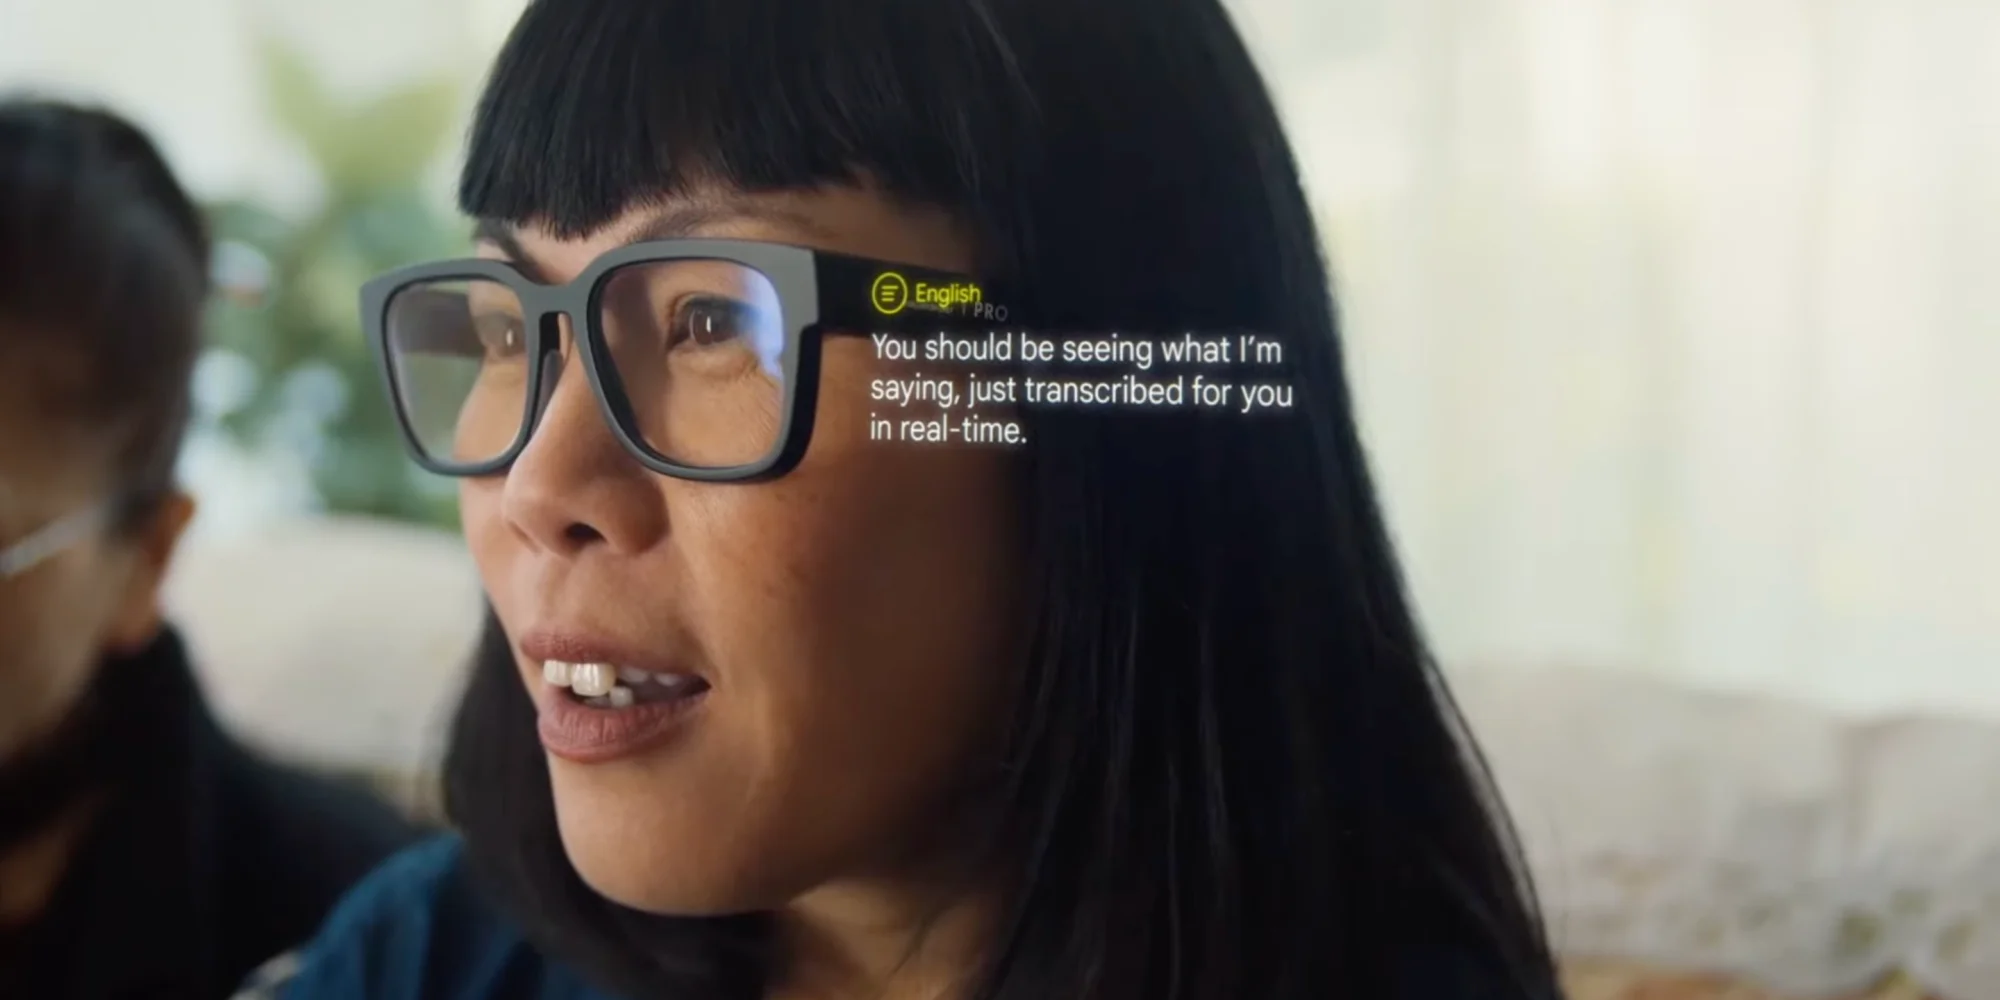 Google demonstrates AR glasses with the function of translating the speech of the interlocutor